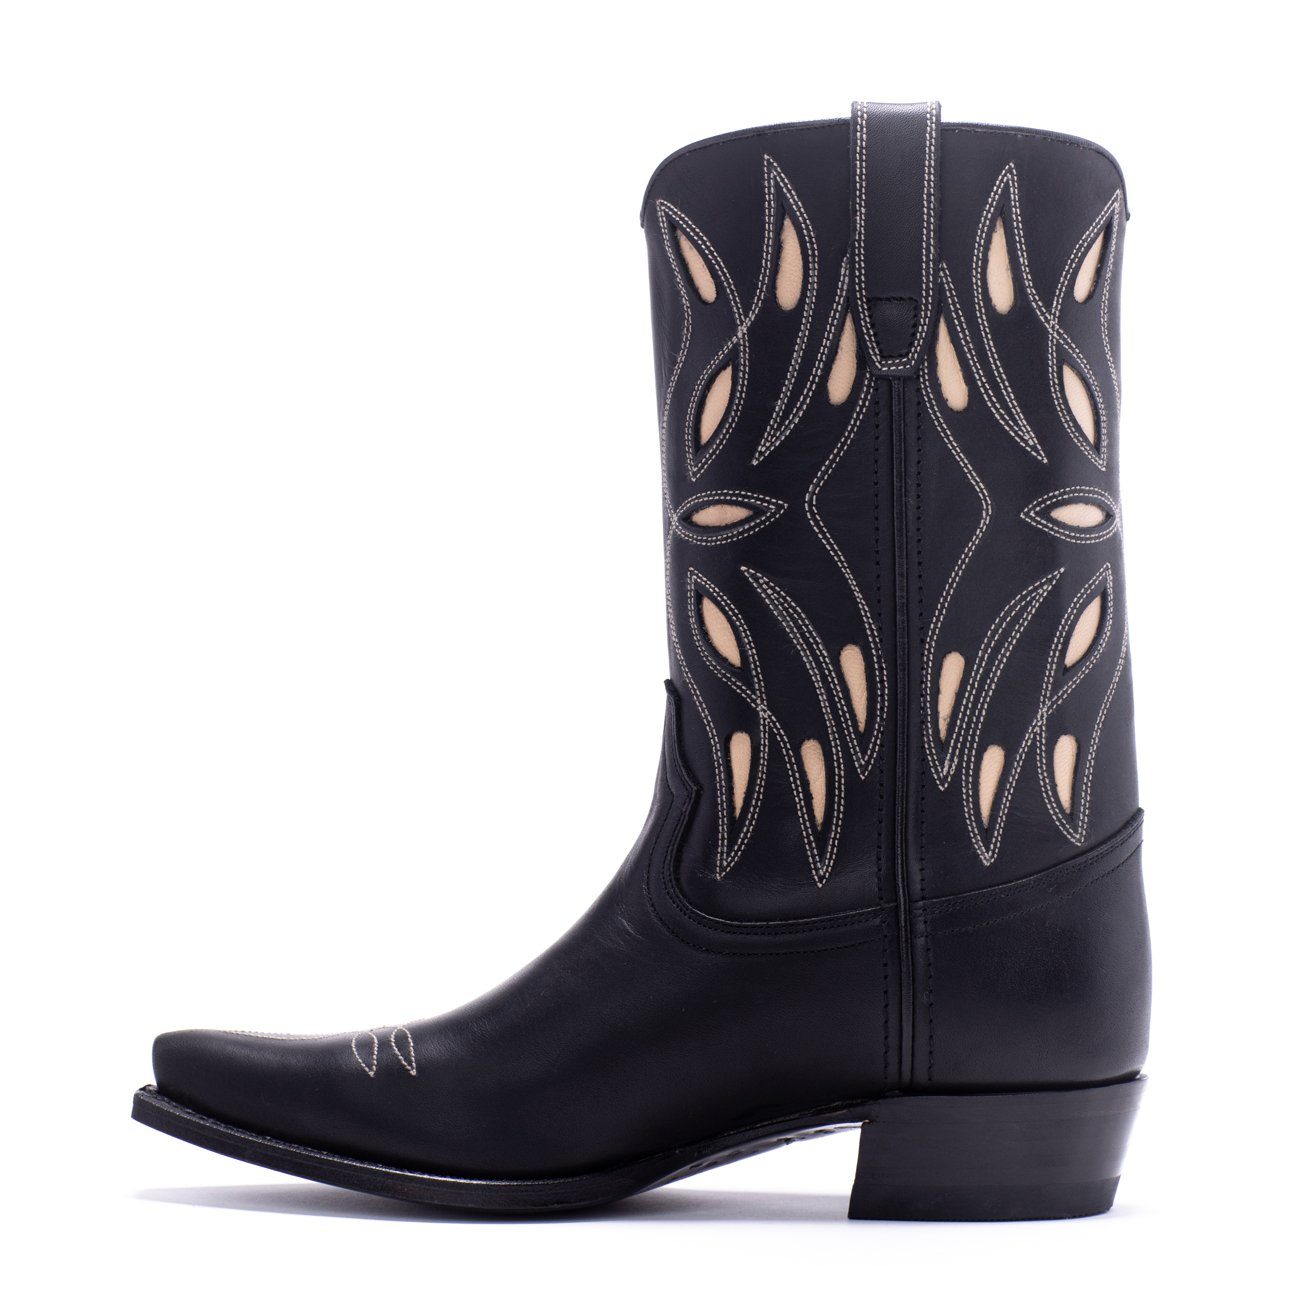 Womens Sagebrush Black Leather Cowboy Boot - Ranch Road Boots™ Side